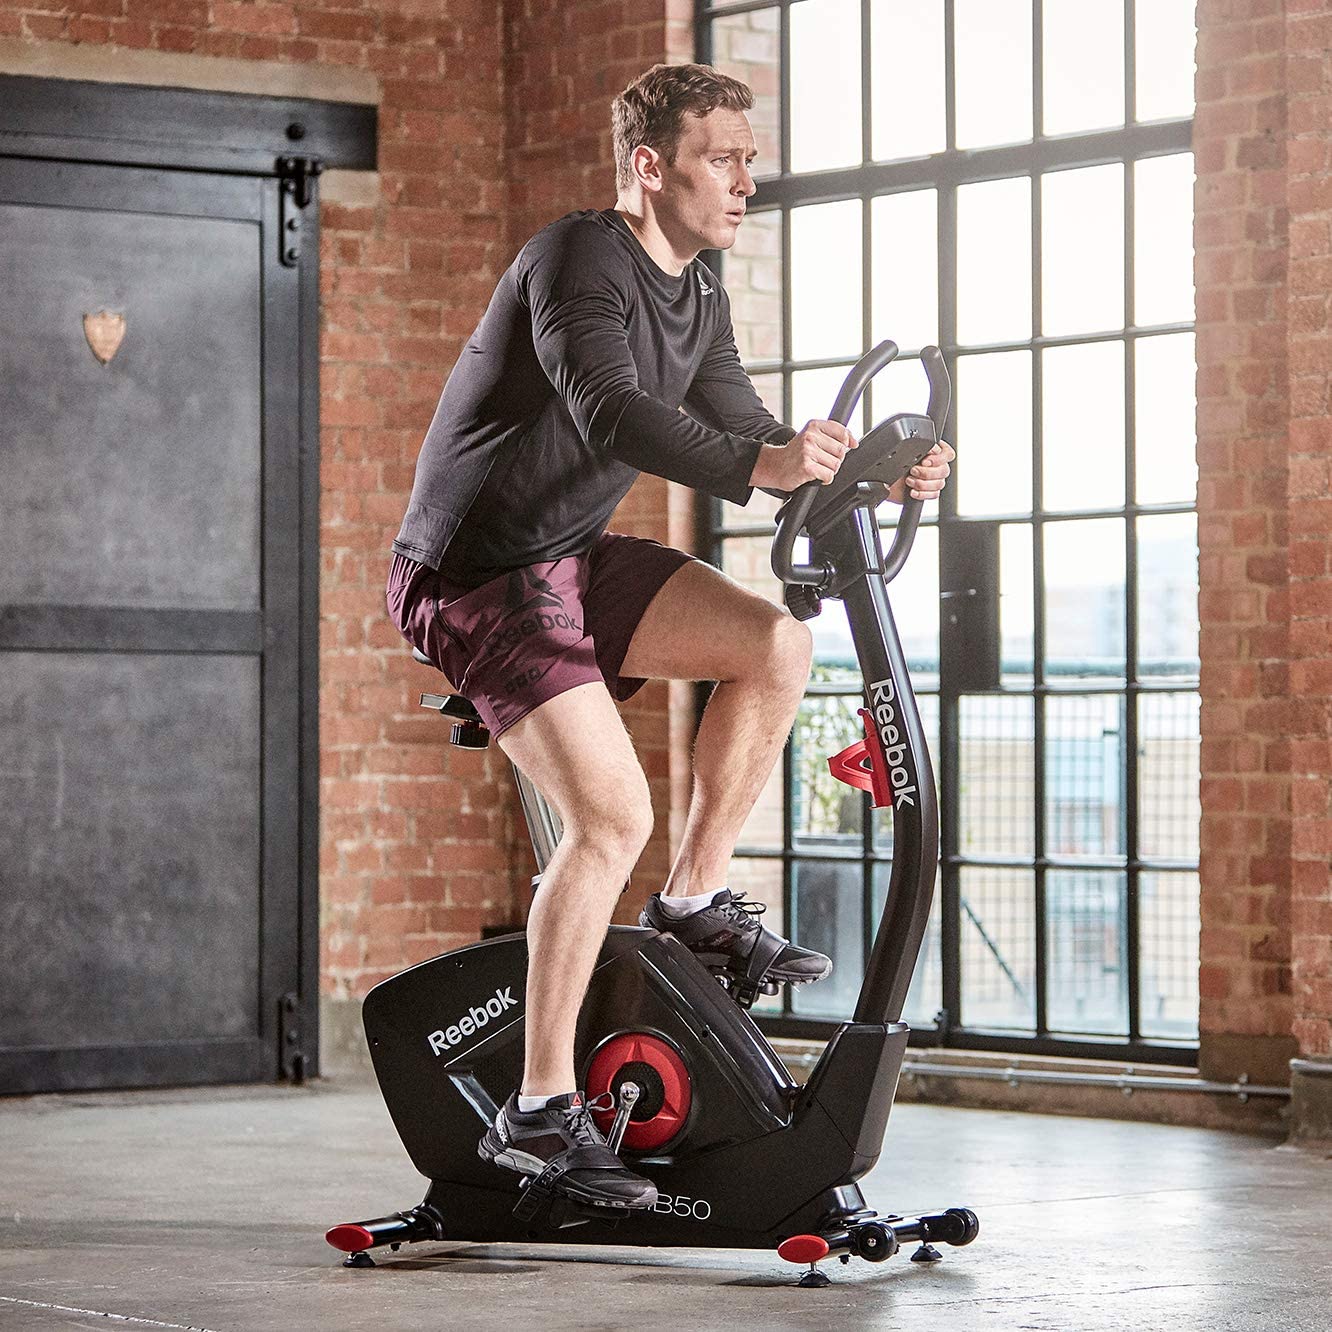 Reebok Exercise Bike GB50 - with a male model  cycling 